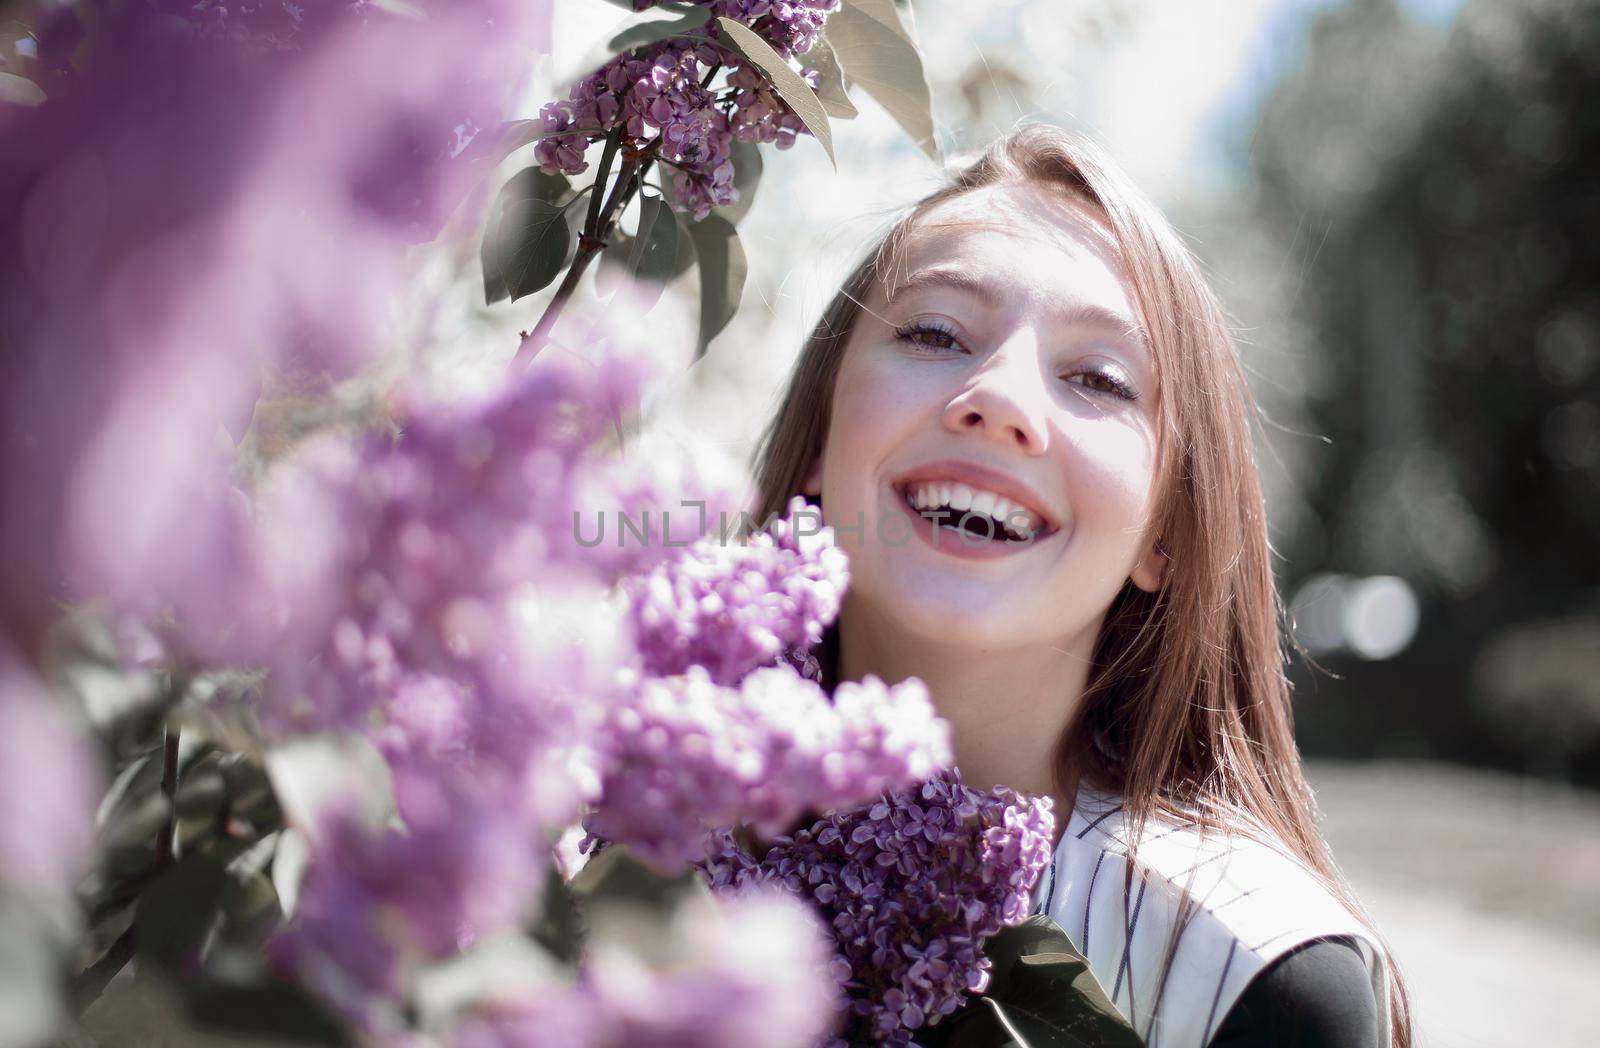 romantic portrait of a beautiful young woman in the spring garden.